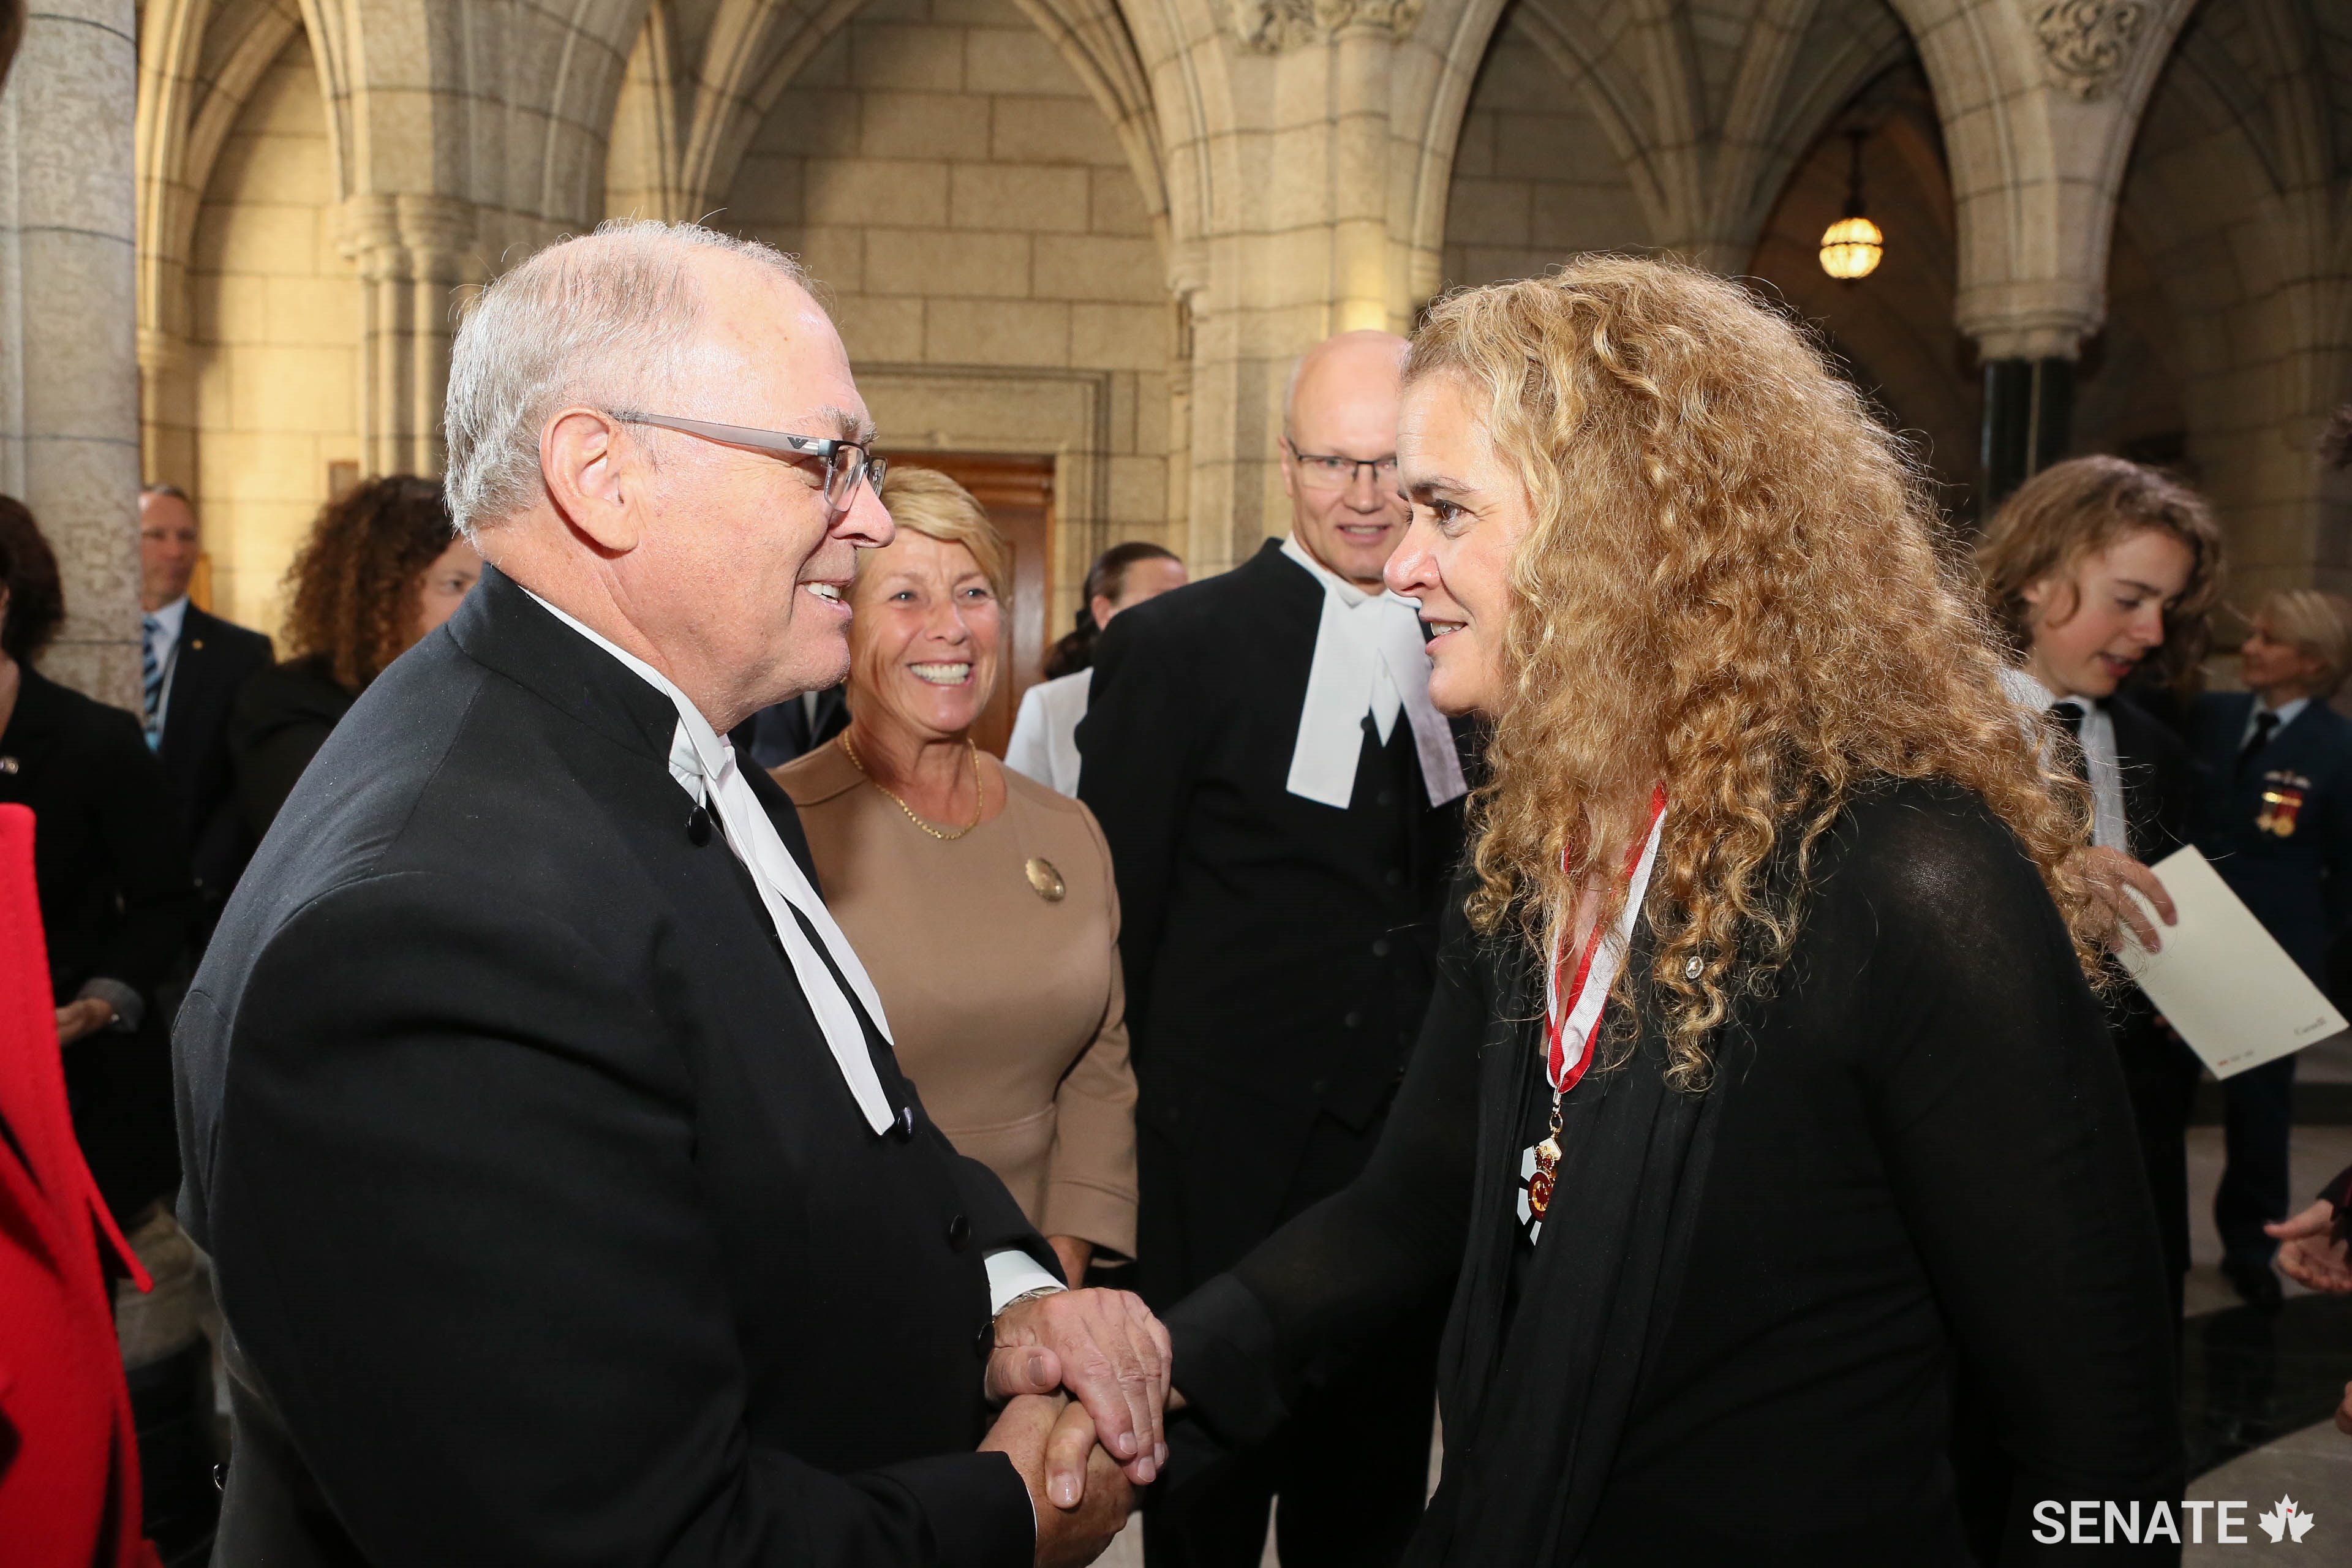 Monday, October 2 — <a href='https://sencanada.ca/en/senators/furey-george-j/'>Speaker George J. Furey</a> had the honour to participate in the <a href='https://sencanada.ca/en/sencaplus/news/senate-chamber-hosts-historic-governor-generals-installation-ceremony/'>swearing-in</a> of Canada’s 29th <a href='https://www.gg.ca/document.aspx?id=13871&lan=eng' target='_Blank'>Governor General, Julie Payette</a>.